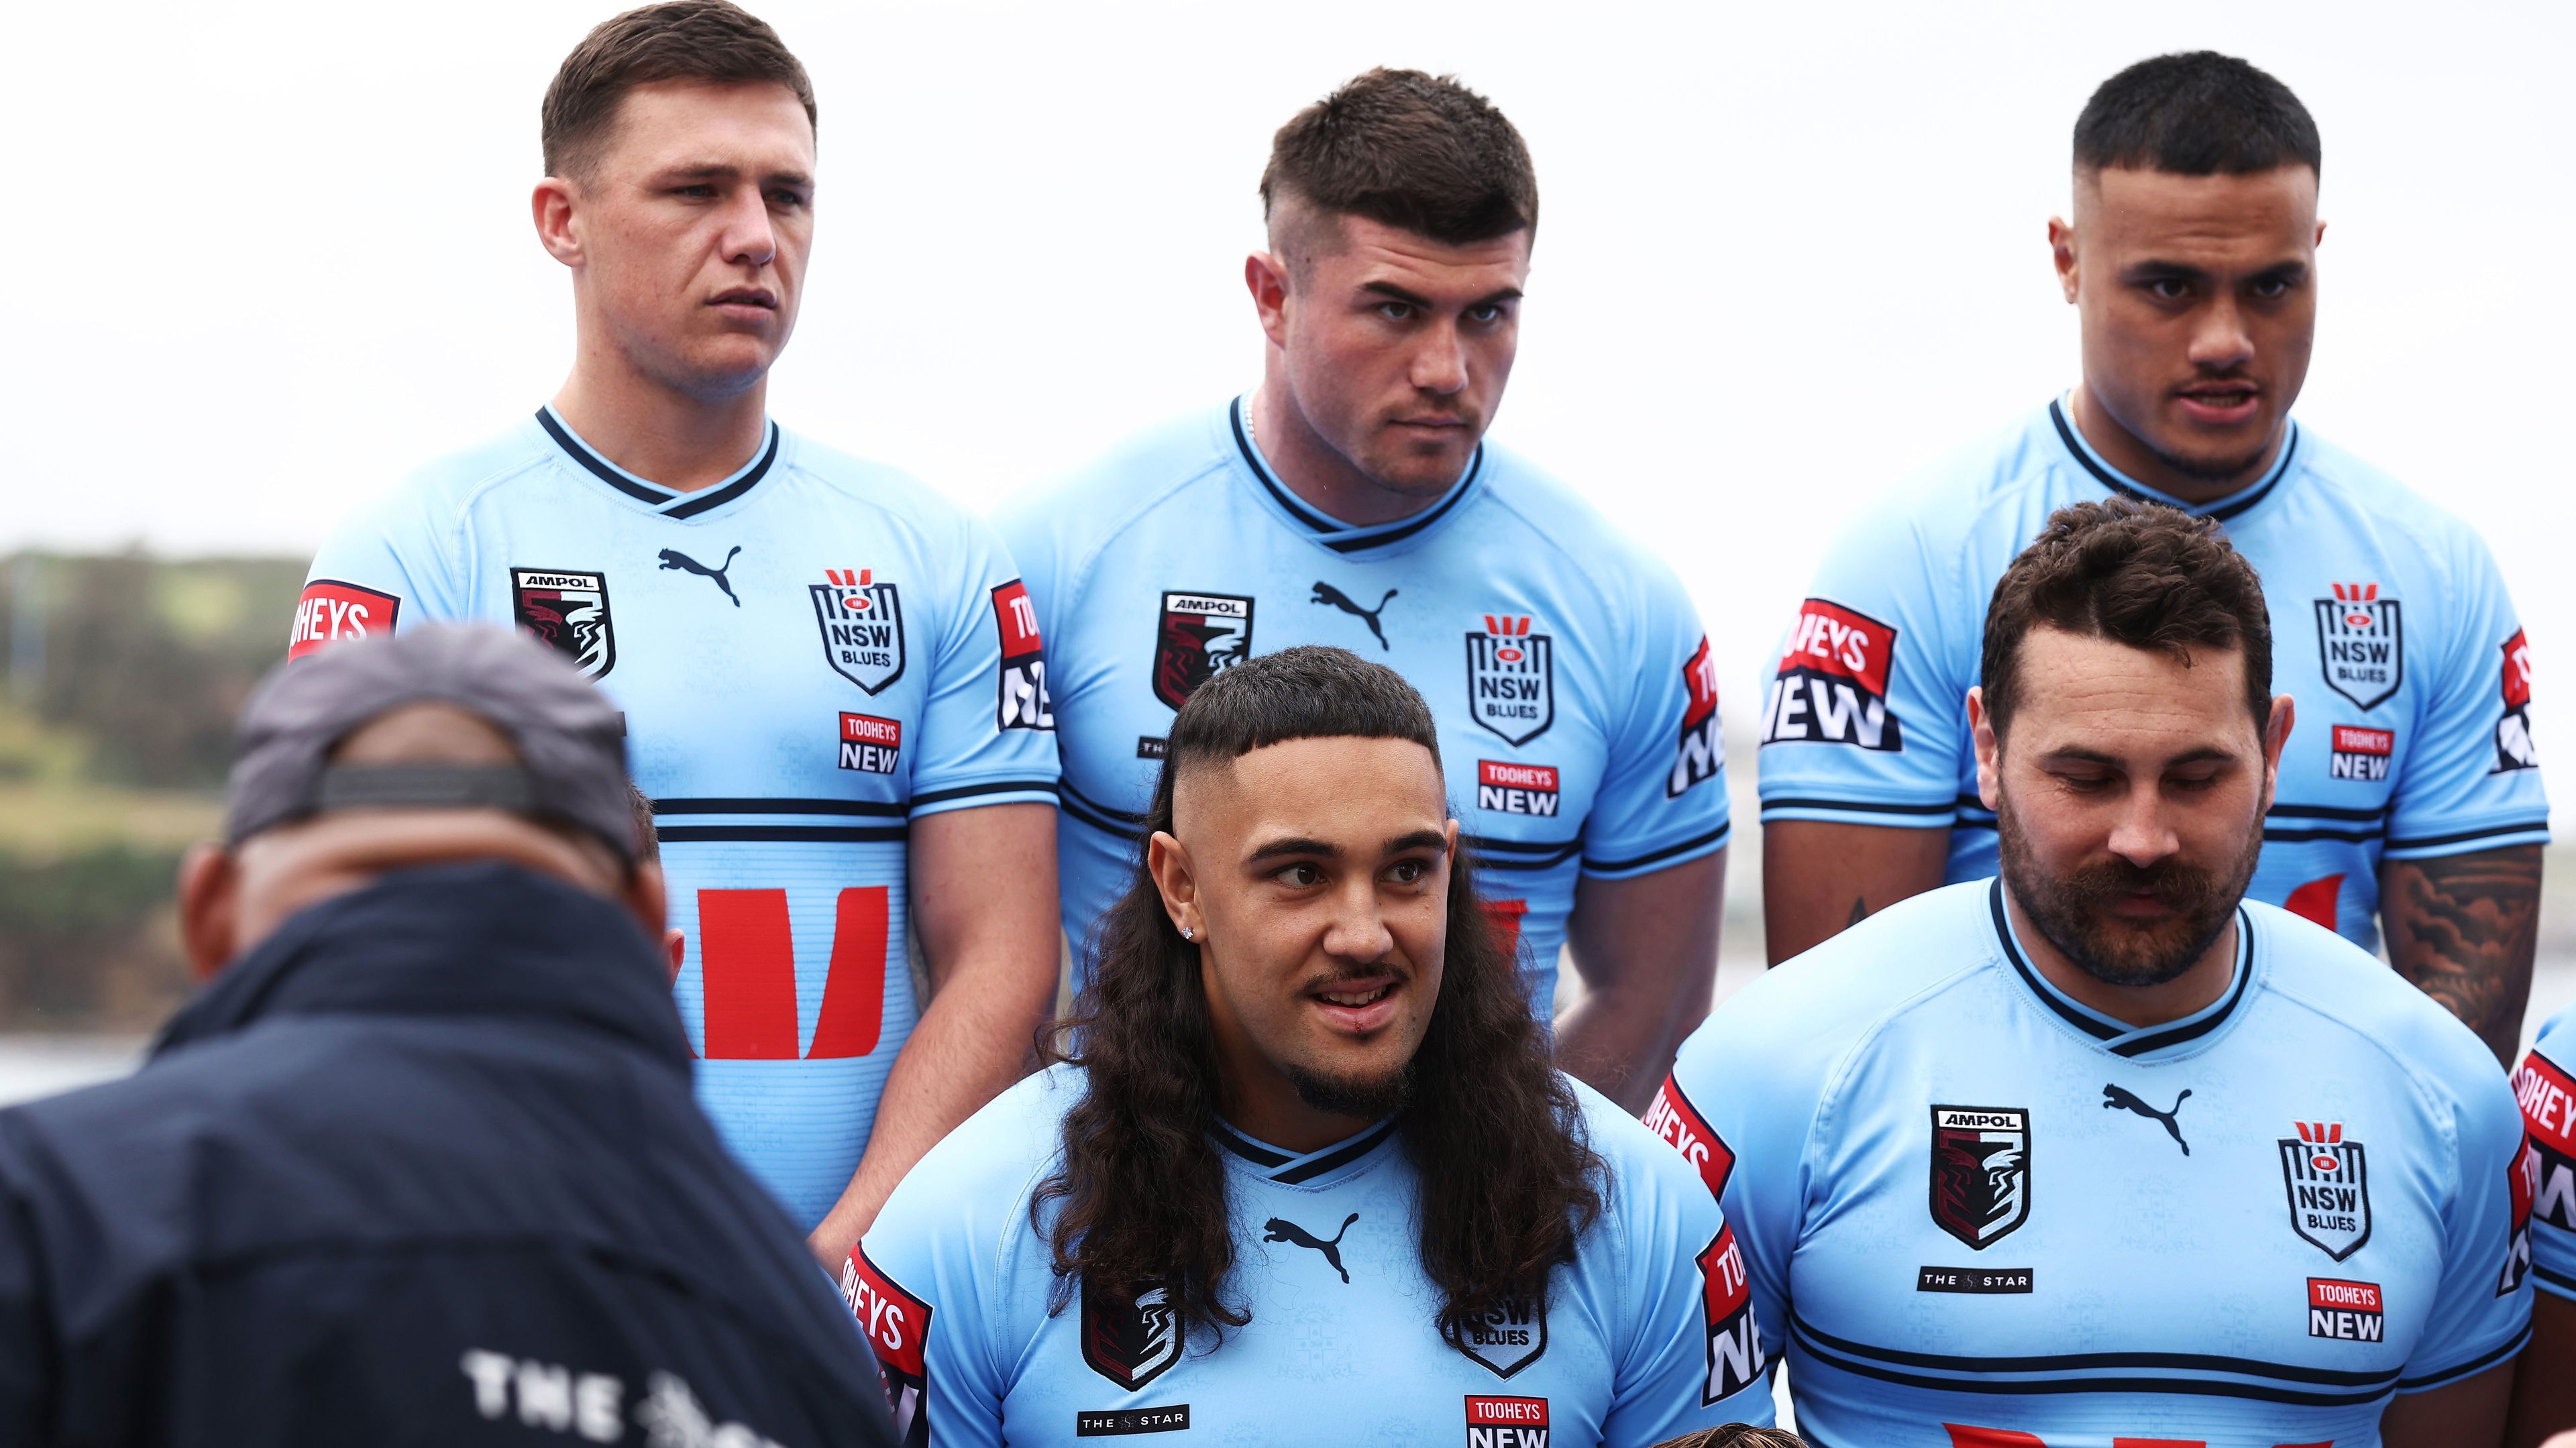 From top left, Scott Drinkwater, Bradman Best, Spencer Leniu, and from bottom left, Keaon Koloamatangiand Reagan Campbell-Gillard pose for the NSW team photo for State of Origin III, 2023.